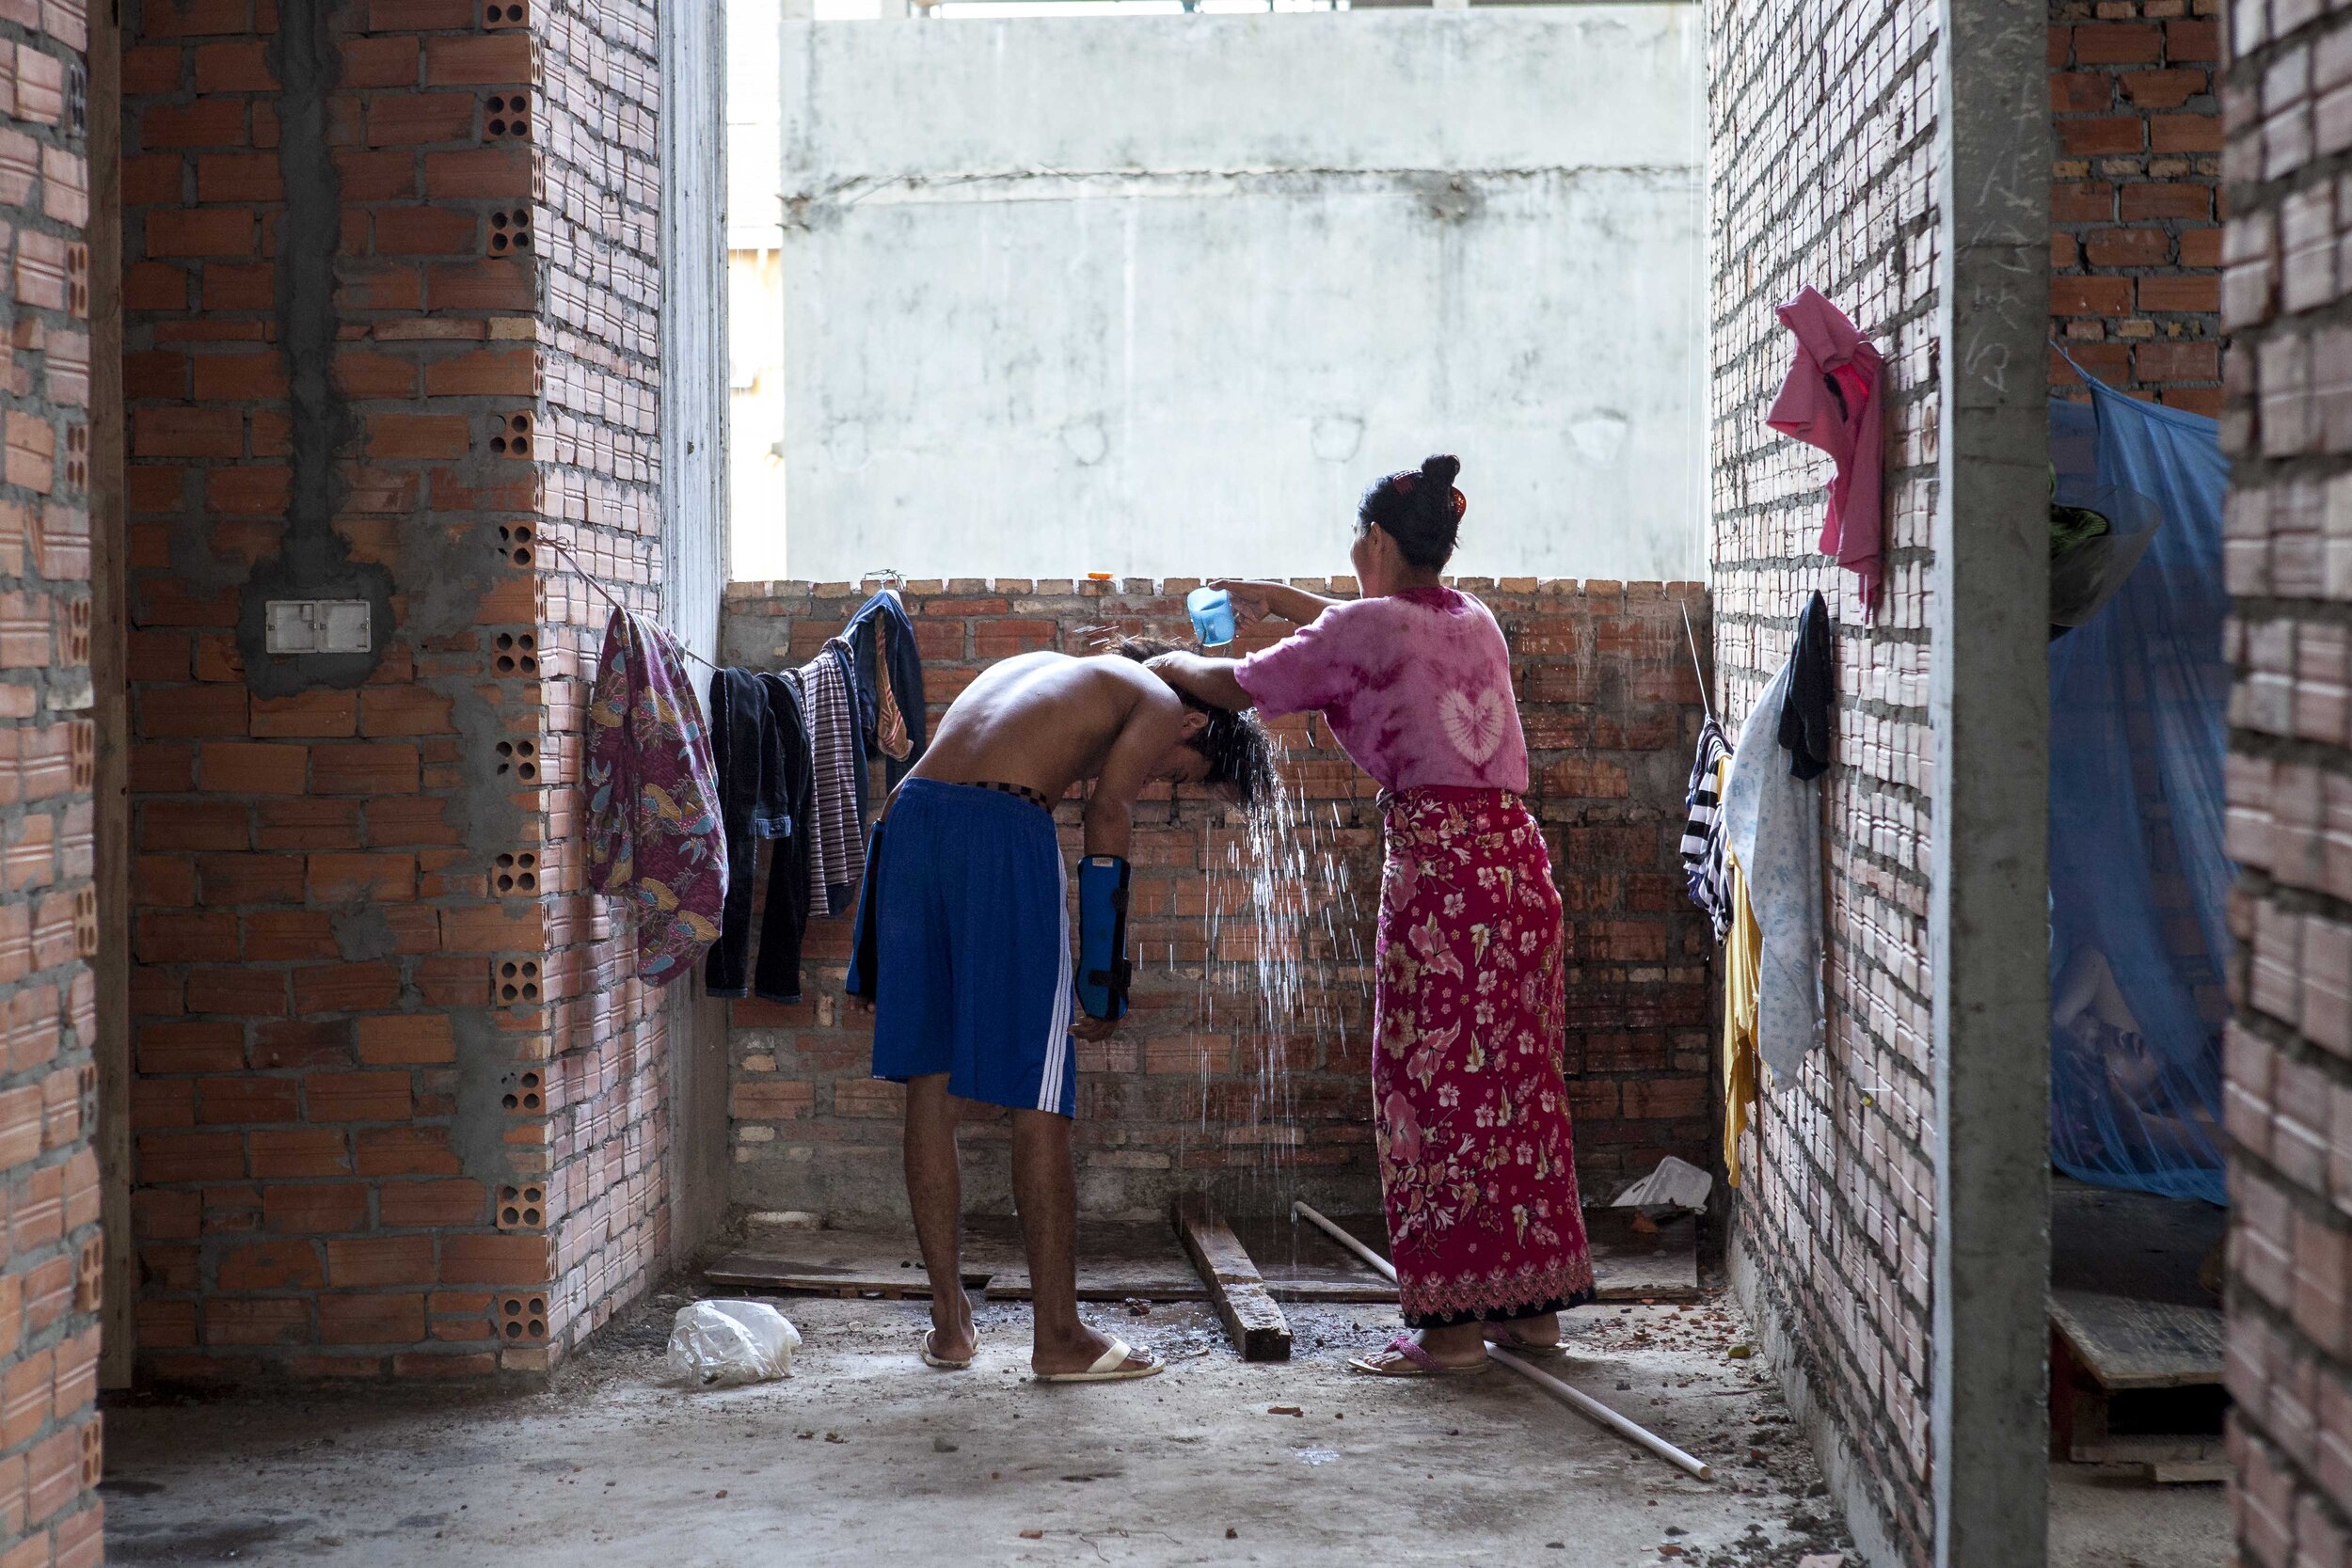  Orn Na, age 40, helps her son Vibol to wash his hair, after a multi-storey fall broke both his arms. Orn Na earns just over $6 a day cementing walls, yet remains stoic that the family can recover from the loss of their savings. 